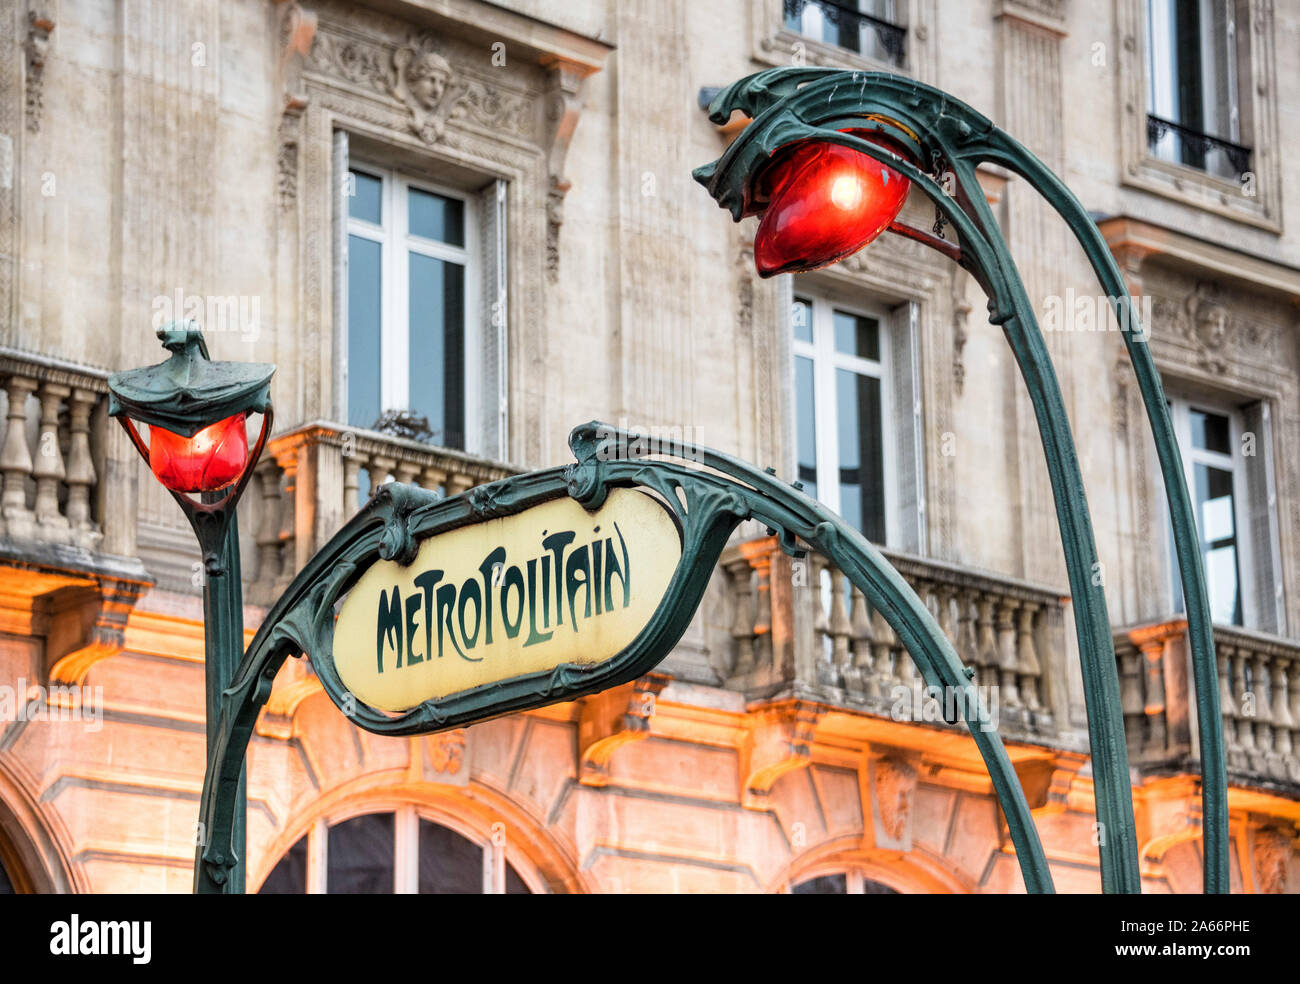 Art Nouveau lamps and 'Metropolitain' sign designed by Hector Guimard, now a protected historical monument, Paris, France Stock Photo